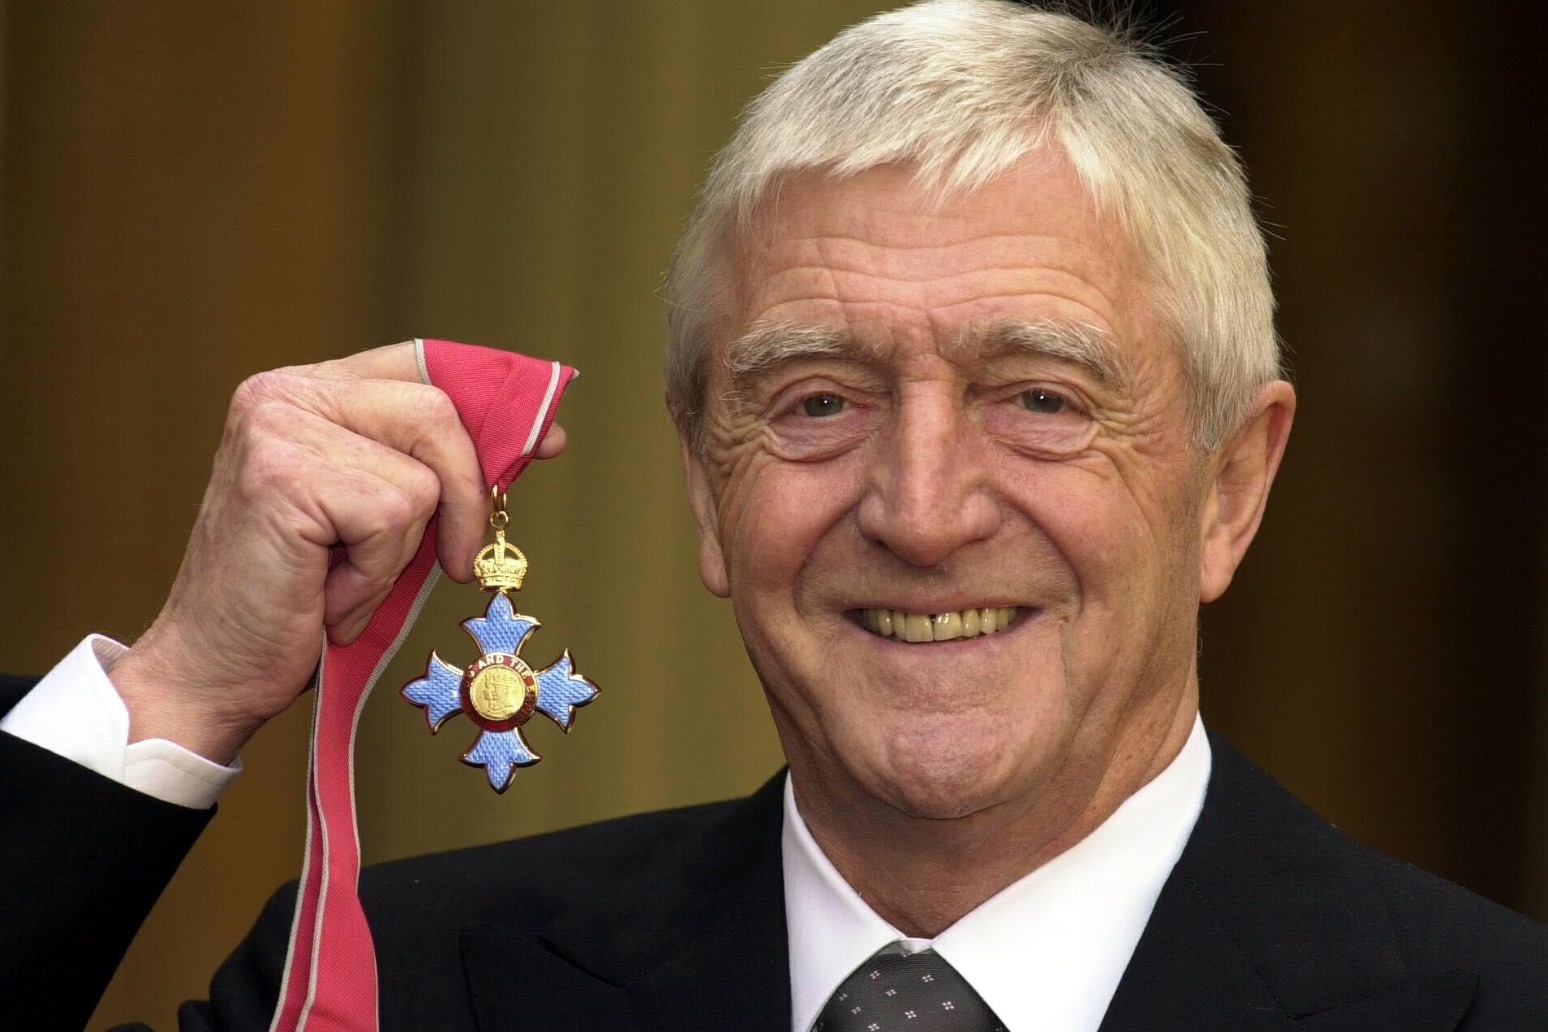 Sir Michael Parkinson, king of the British chat show hosts, dies aged 88 